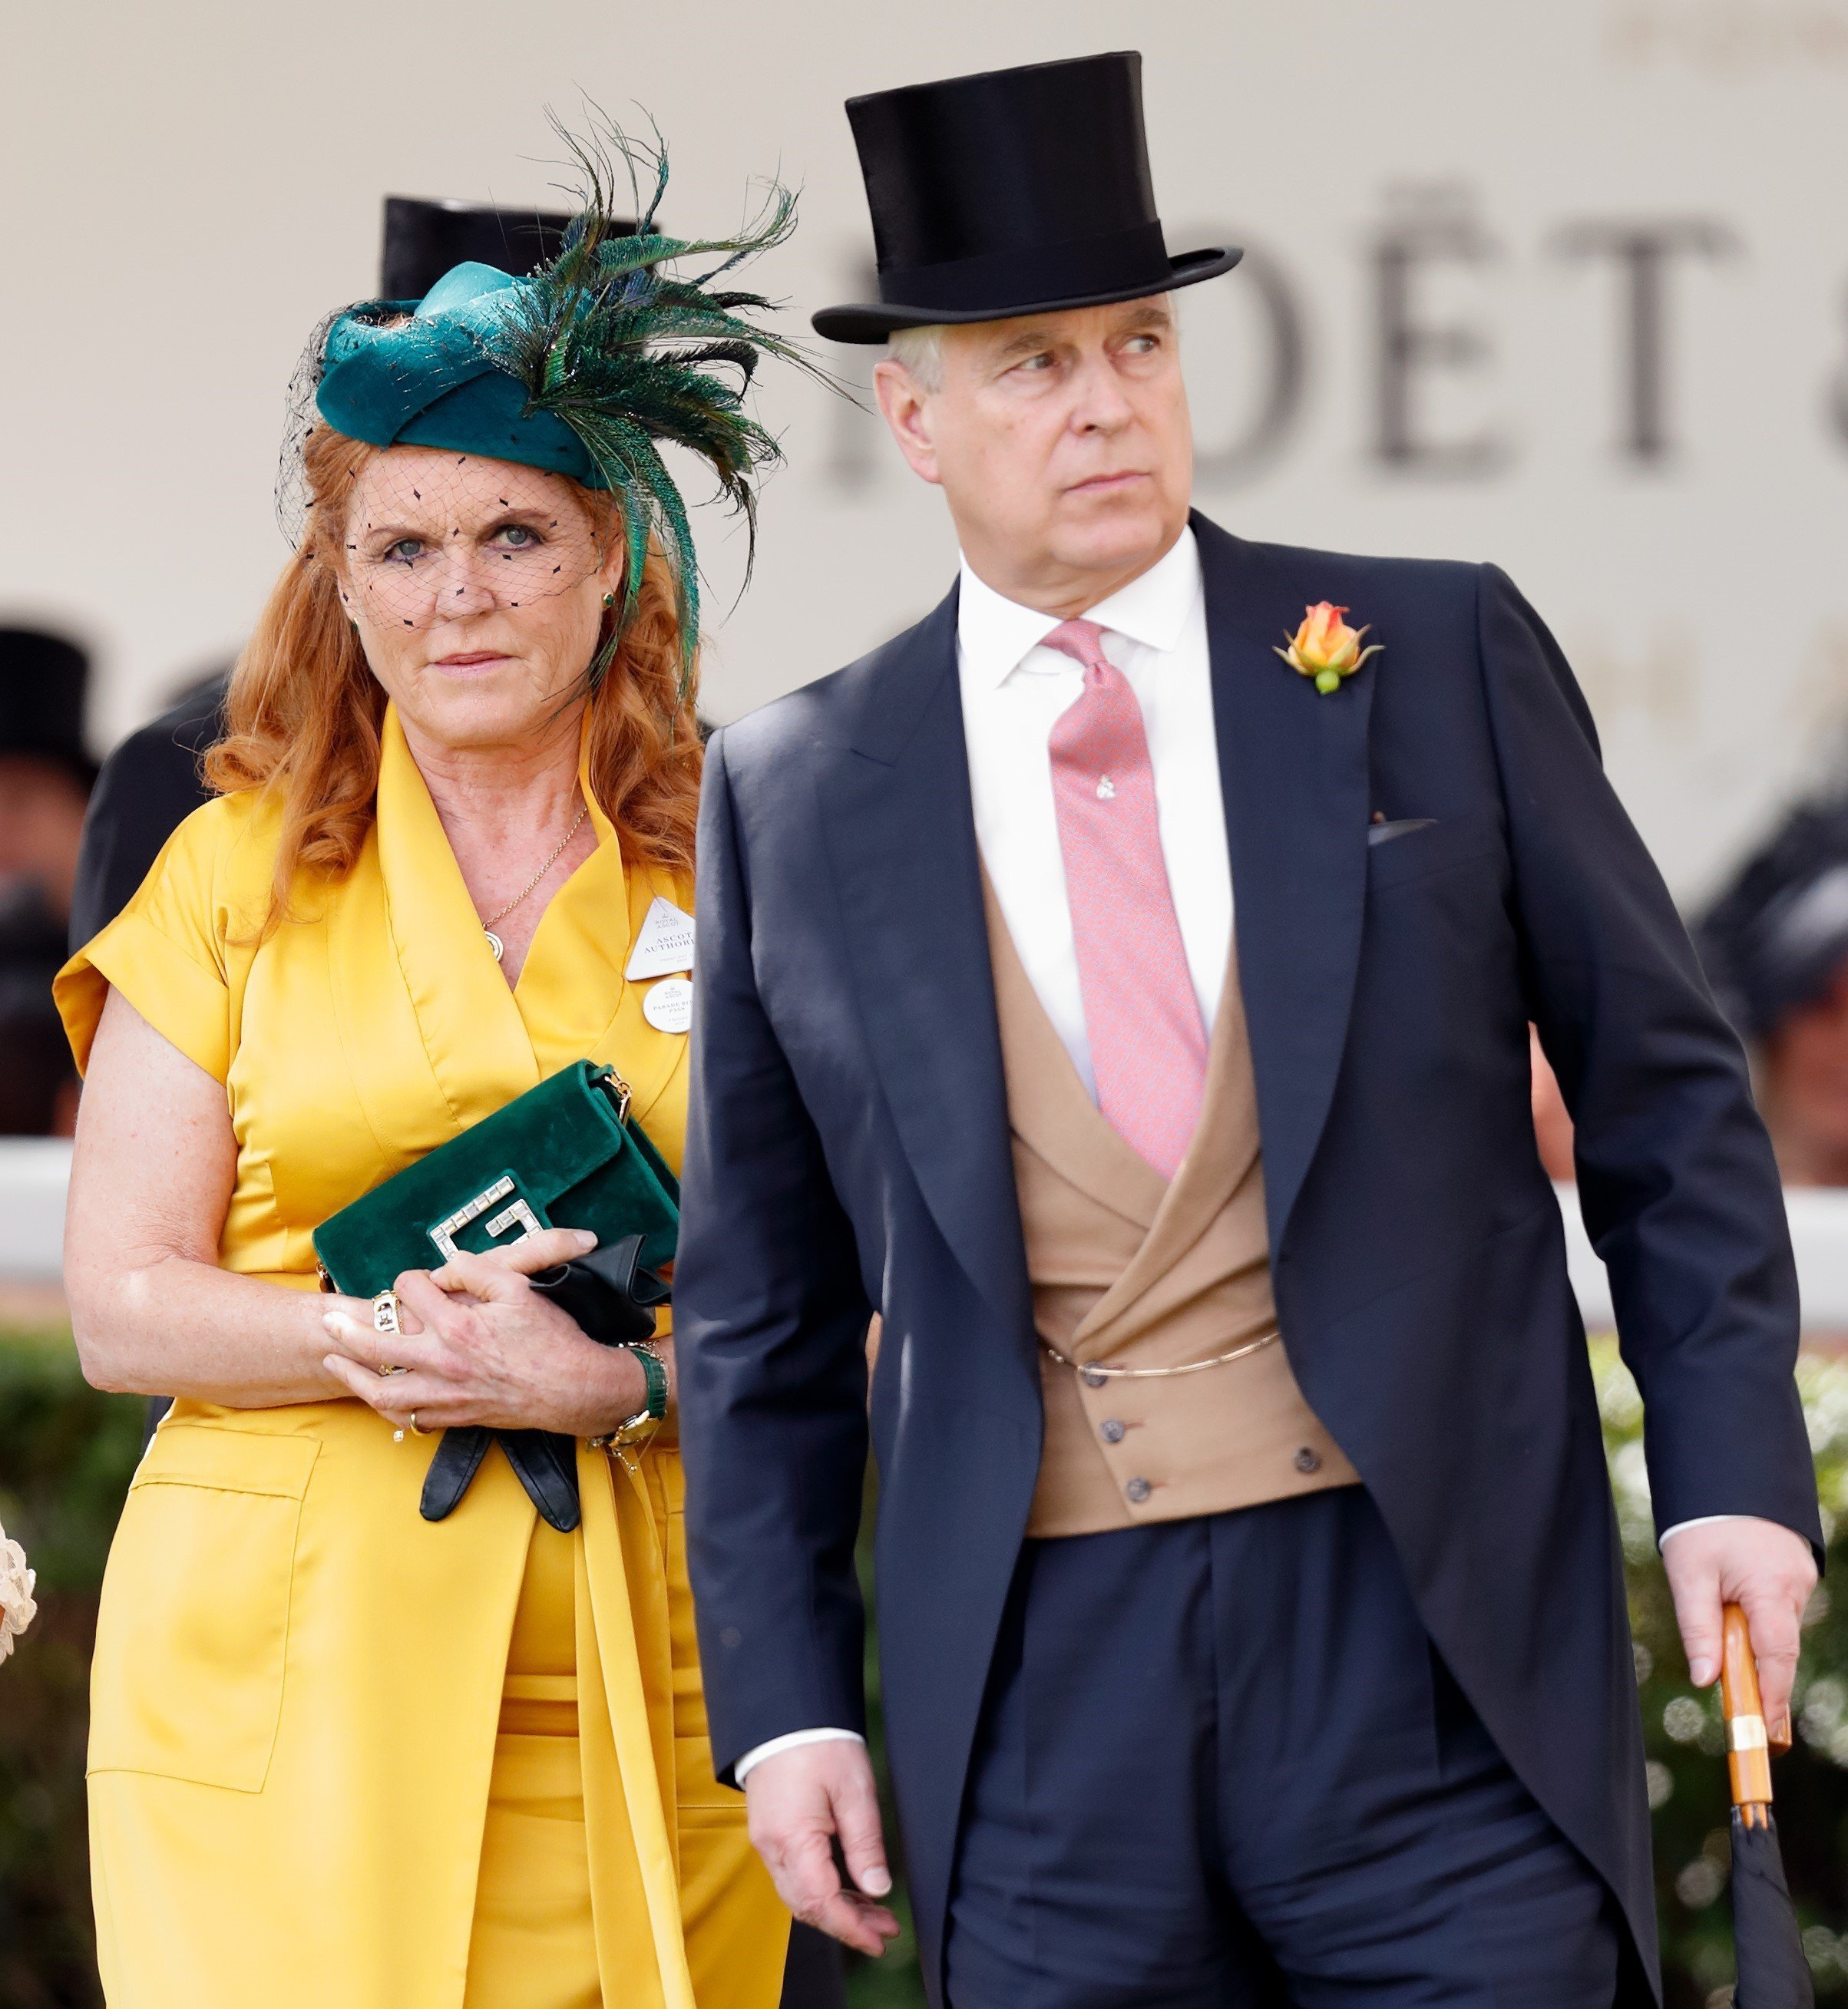 Sarah Ferguson and Prince Andrew at the Royal Ascot together